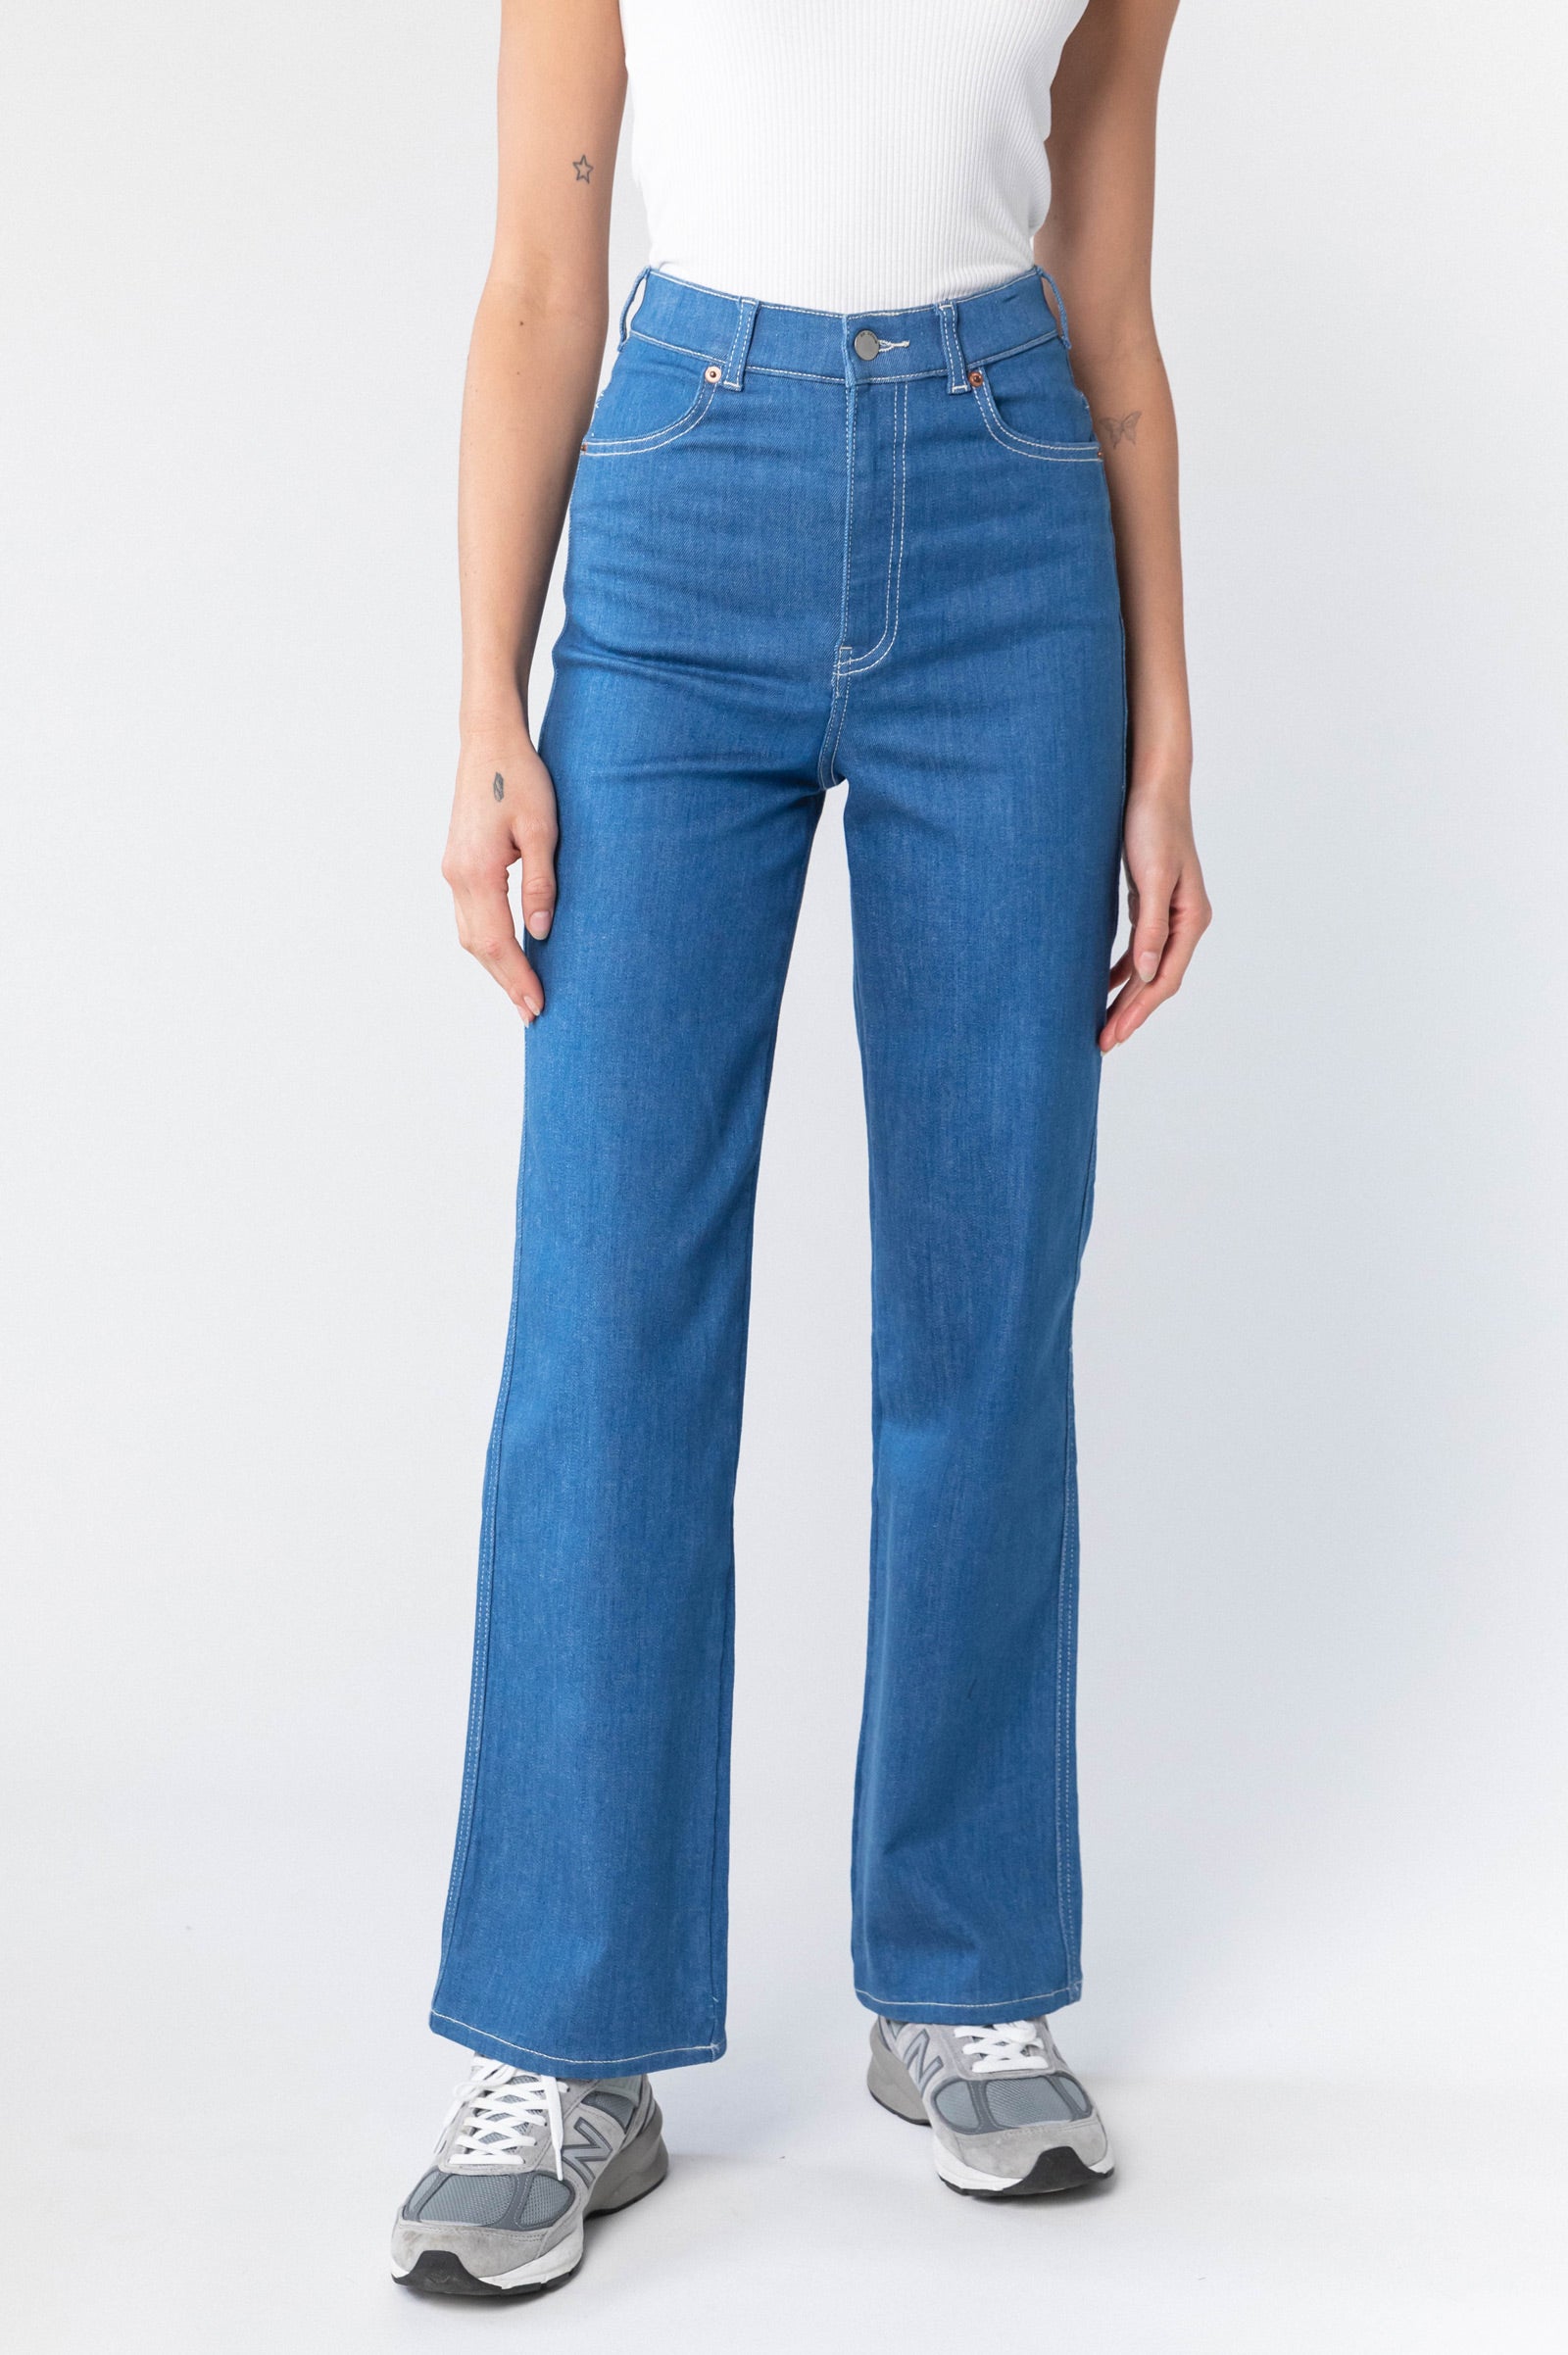 Moxy Straight Jeans in Less Blue Rinse | Dr Denim Jeans Australia – Dr ...